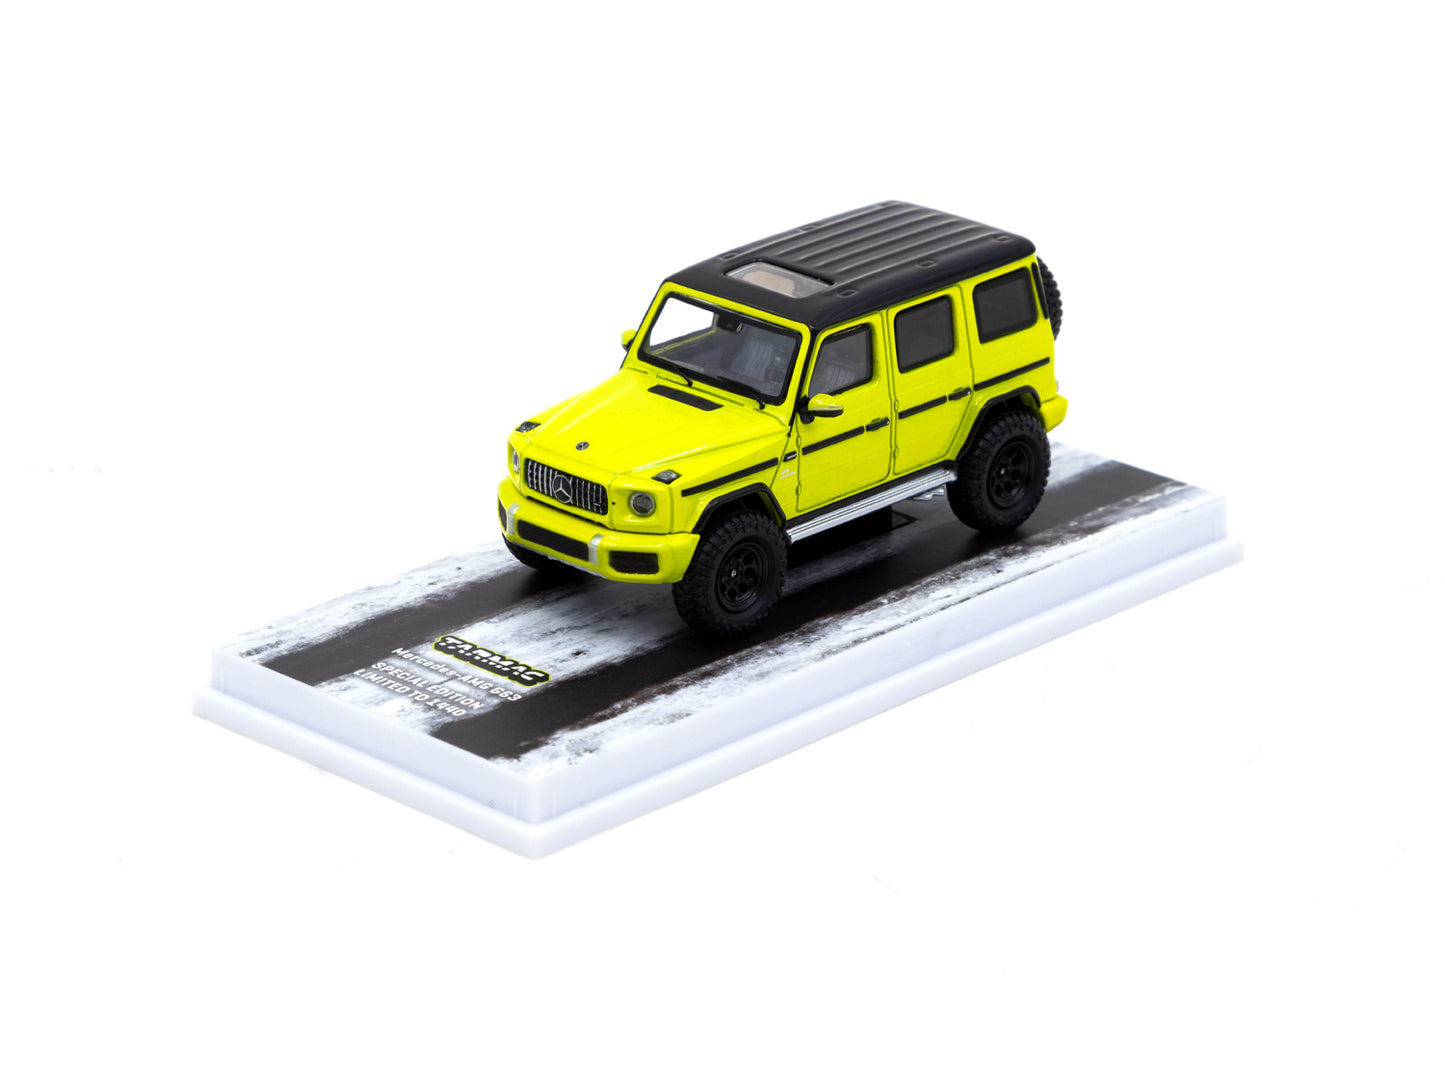 Tarmac Works 1:64 Scale Mercedes-AMG G63
ELECTRIC BEAM/YELLOW
*** Special Edition ***